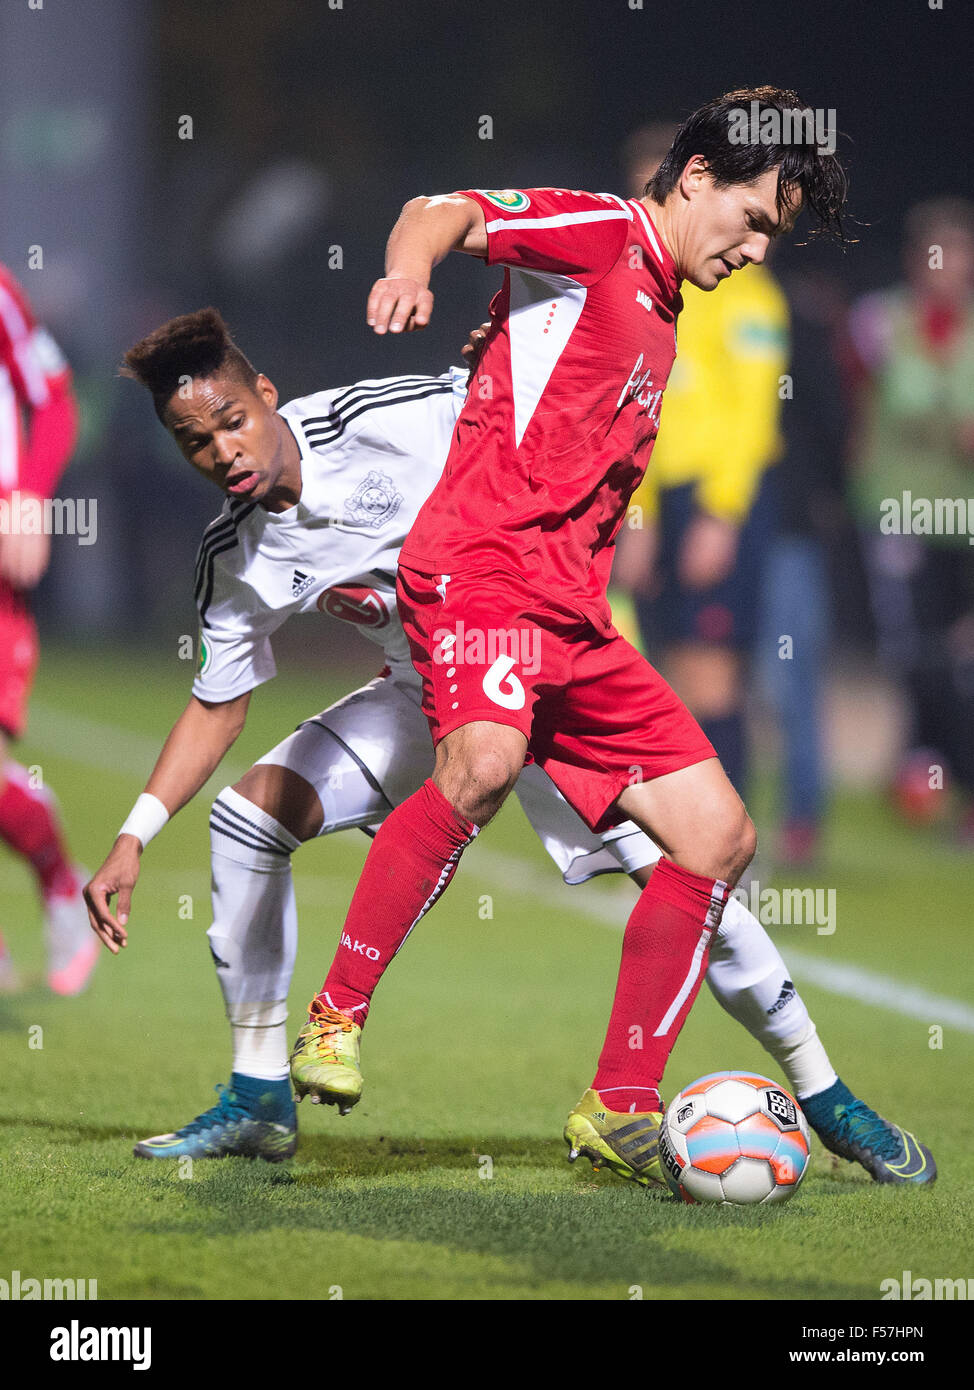 Cologne, Germany. 28th Oct, 2015. Leverkusen's Wendell (L) and Koeln's Tim Jerat vie for the ball during the DFB Cup match between Viktoria Koeln and Bayer Leverkusen in Sportpark Hoehenberg in Cologne, Germany, 28 October 2015. Photo: MARIUS BECKER/dpa/Alamy Live News Stock Photo